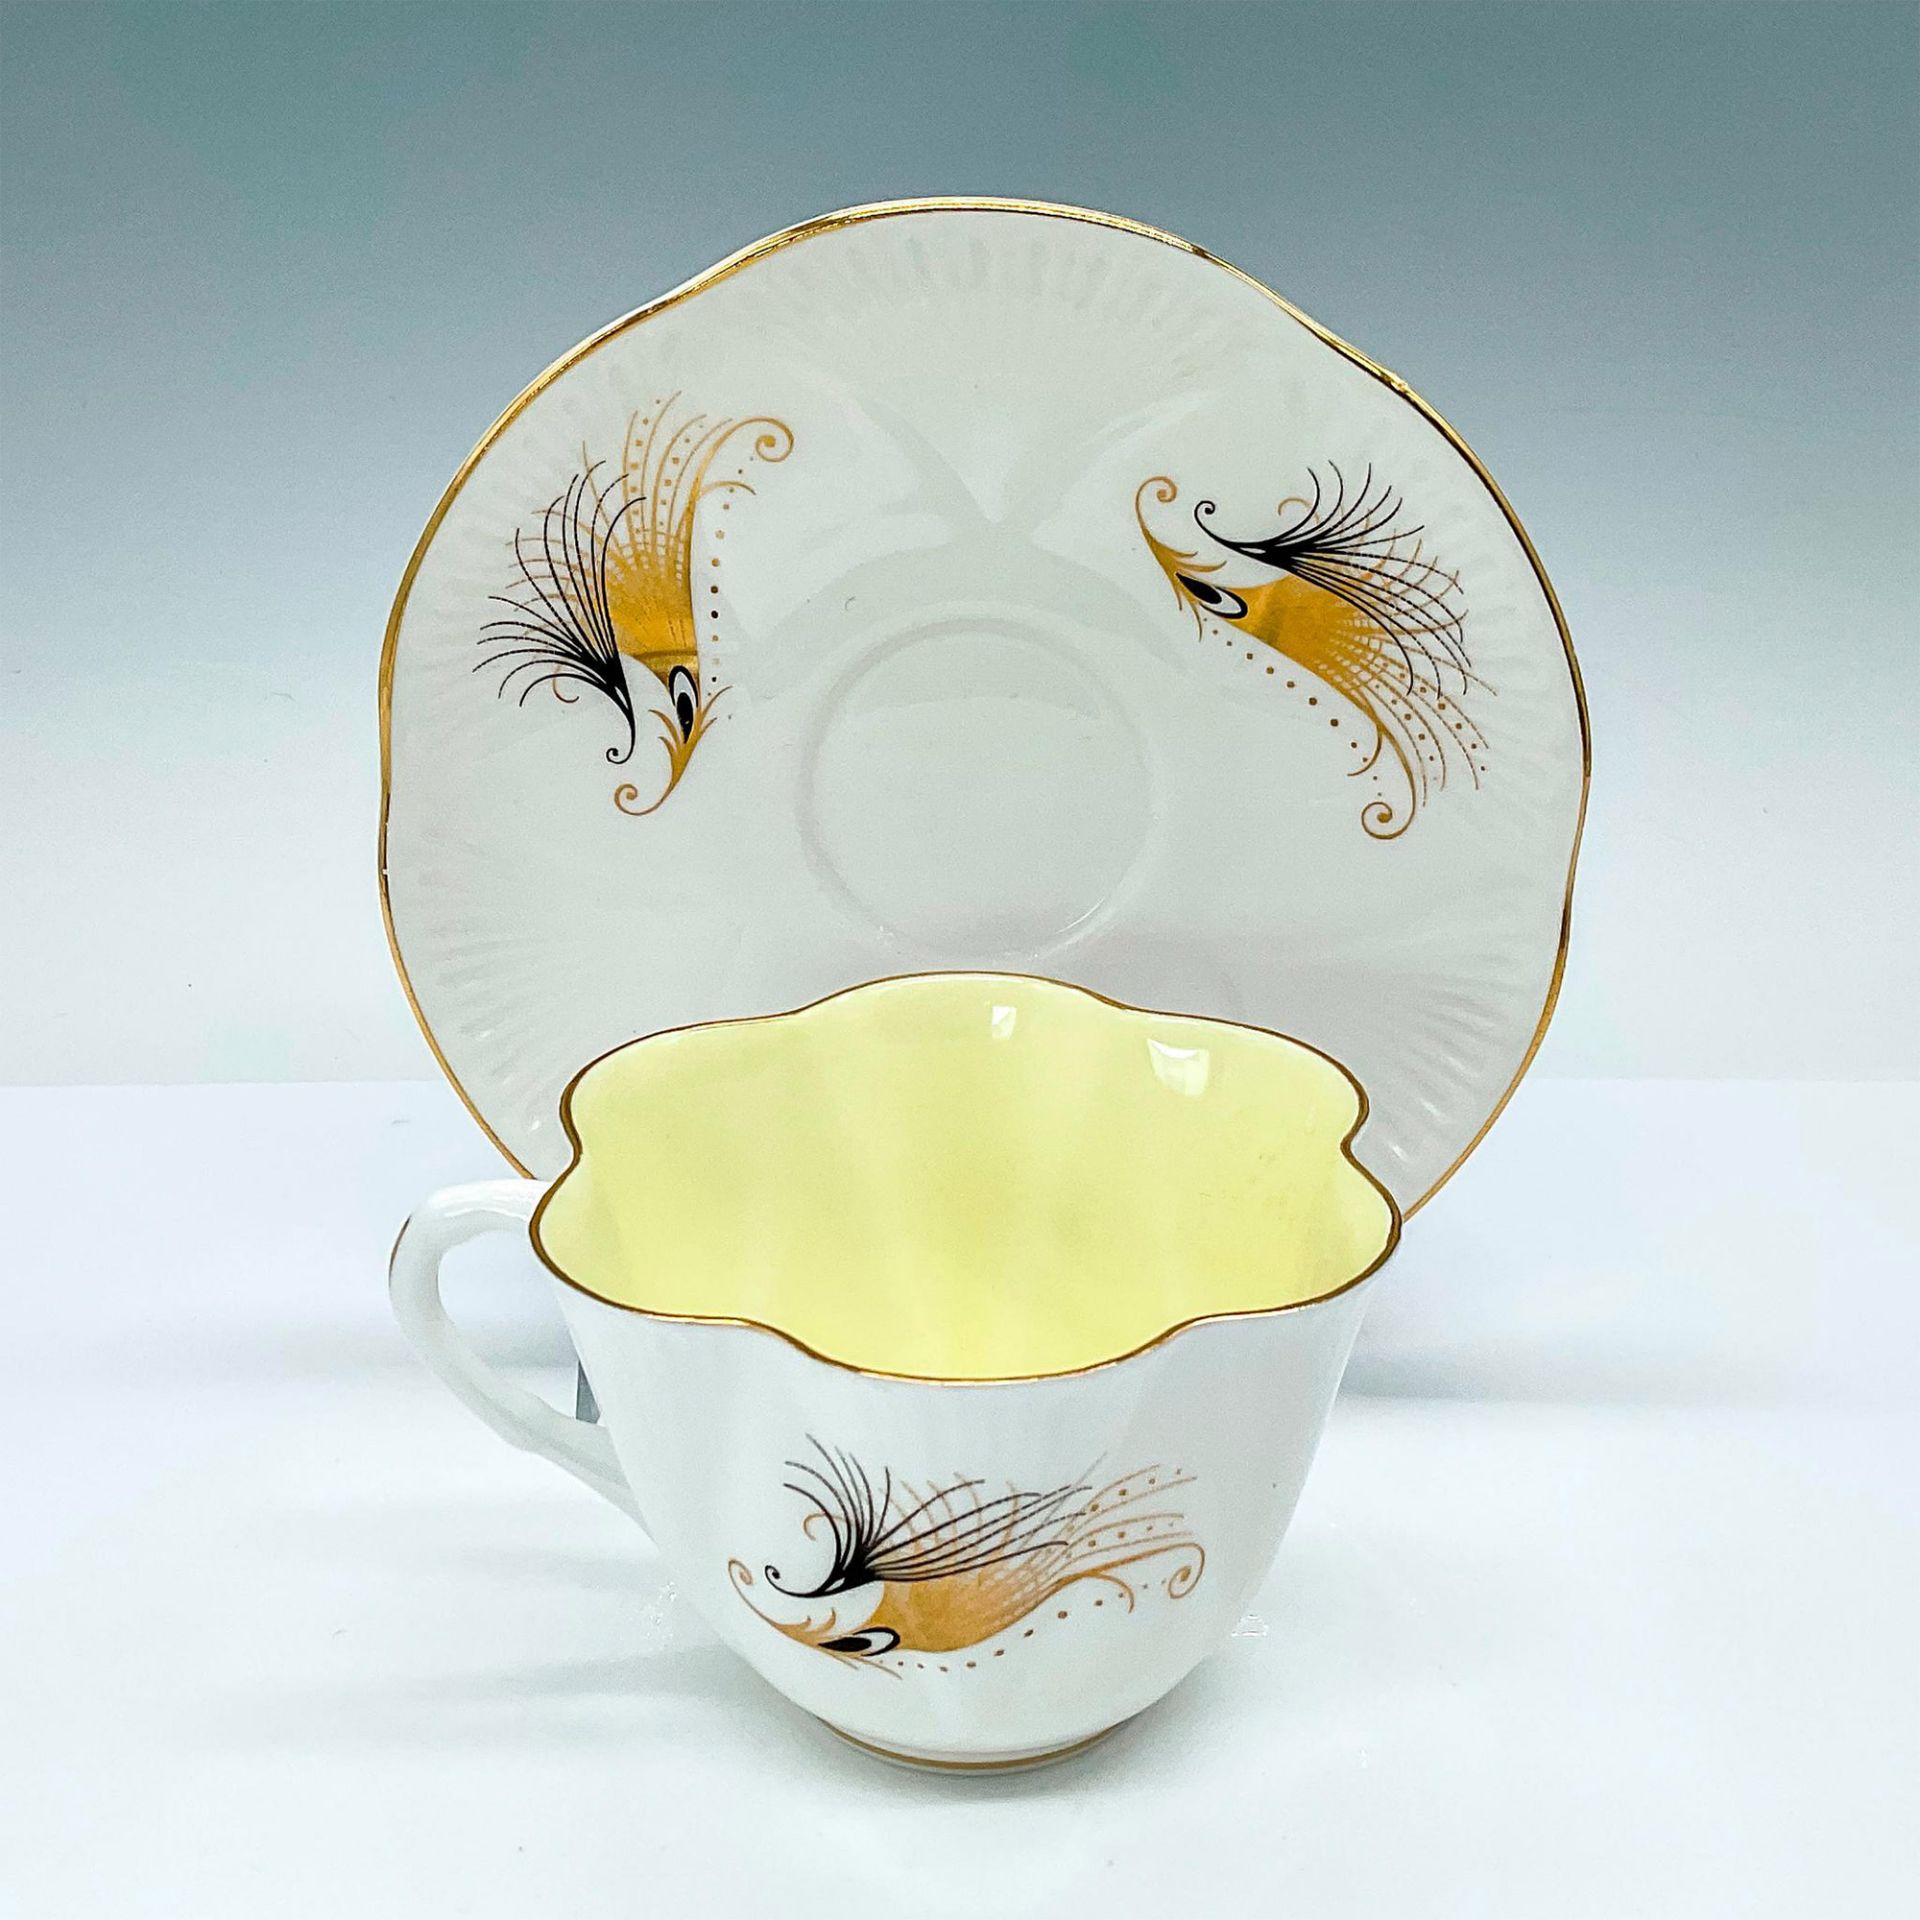 Shelley Bone China Teacup & Saucer Set, Gold Feathers - Image 2 of 3